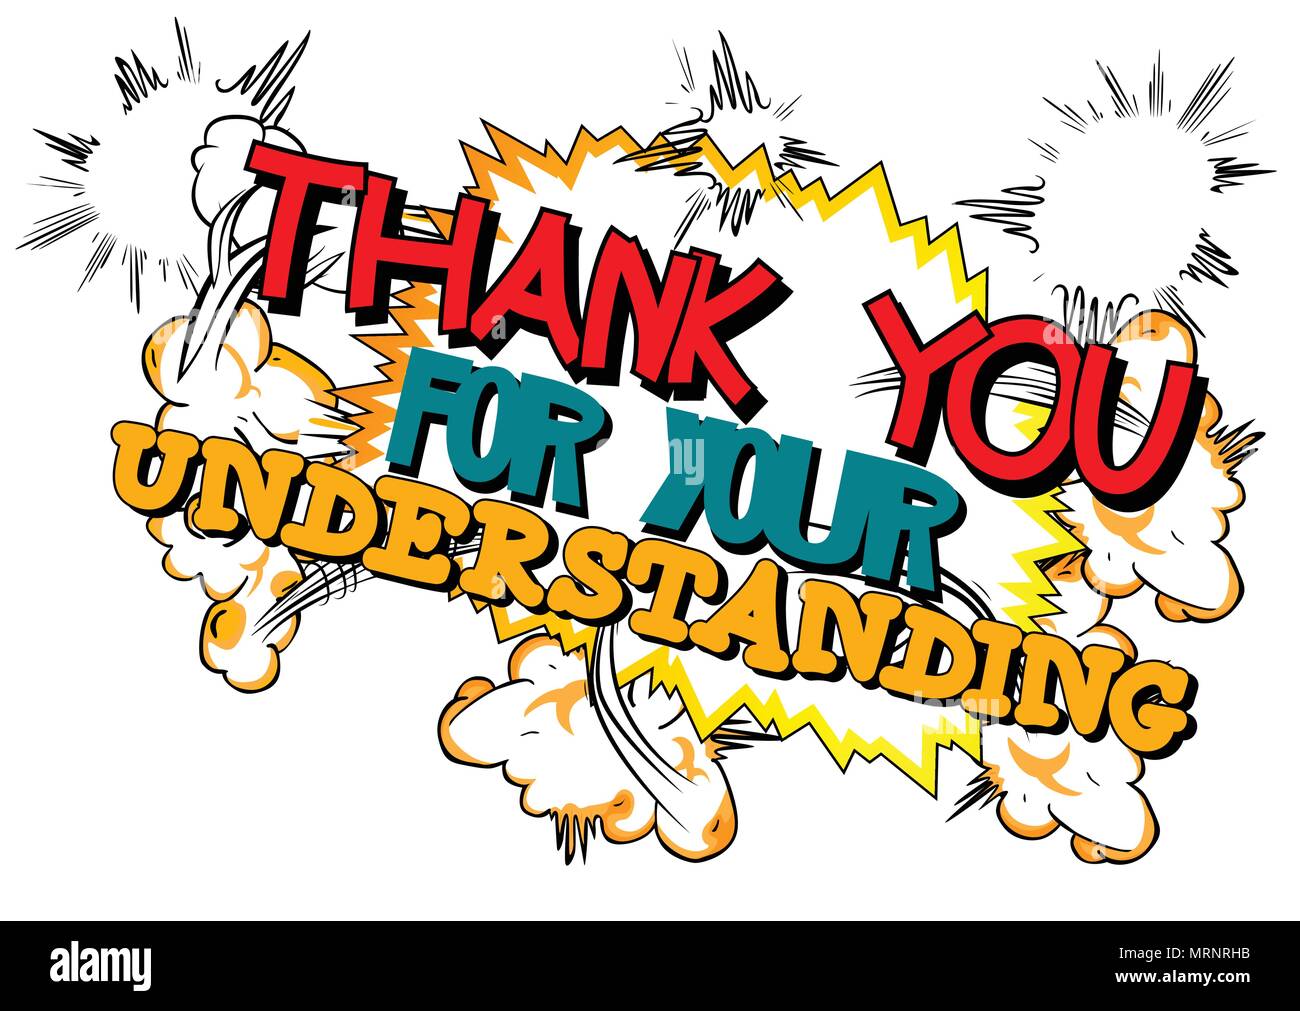 Thank You For Your Understanding Vector Illustrated Comic Book Style Design Inspirational Motivational Quote Stock Vector Image Art Alamy